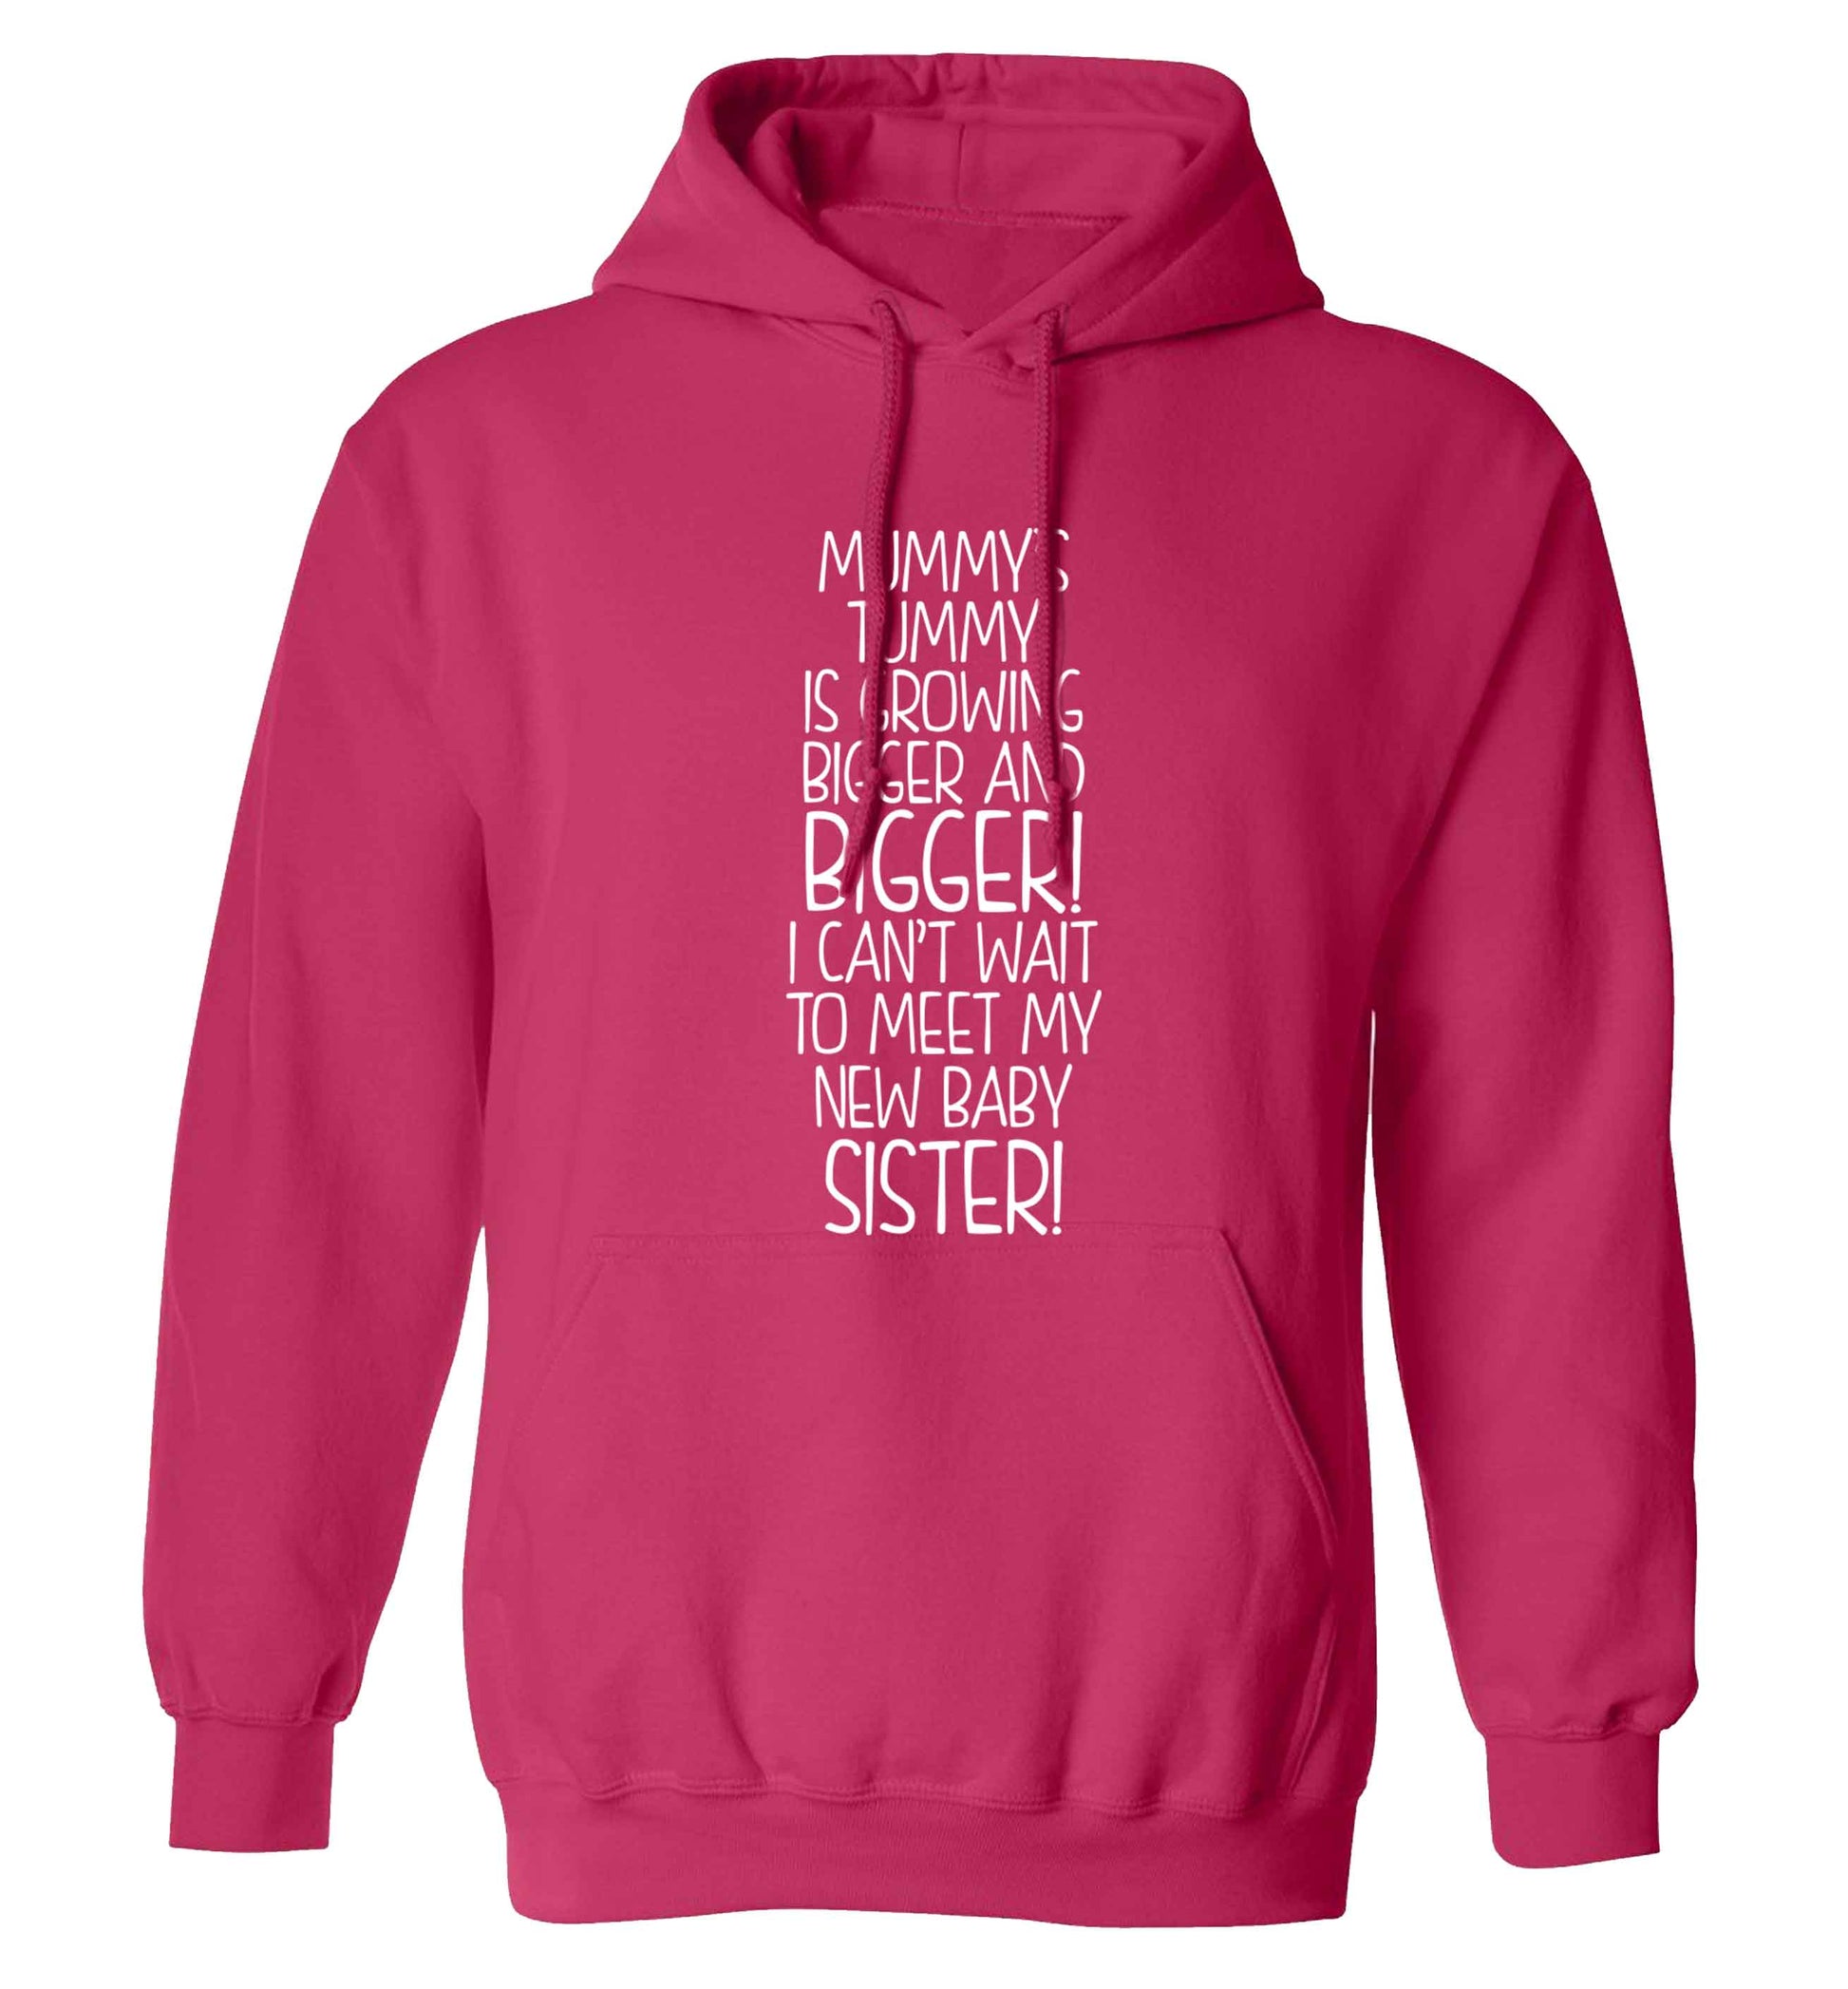 Mummy's tummy is growing bigger and bigger I can't wait to meet my new baby sister! adults unisex pink hoodie 2XL